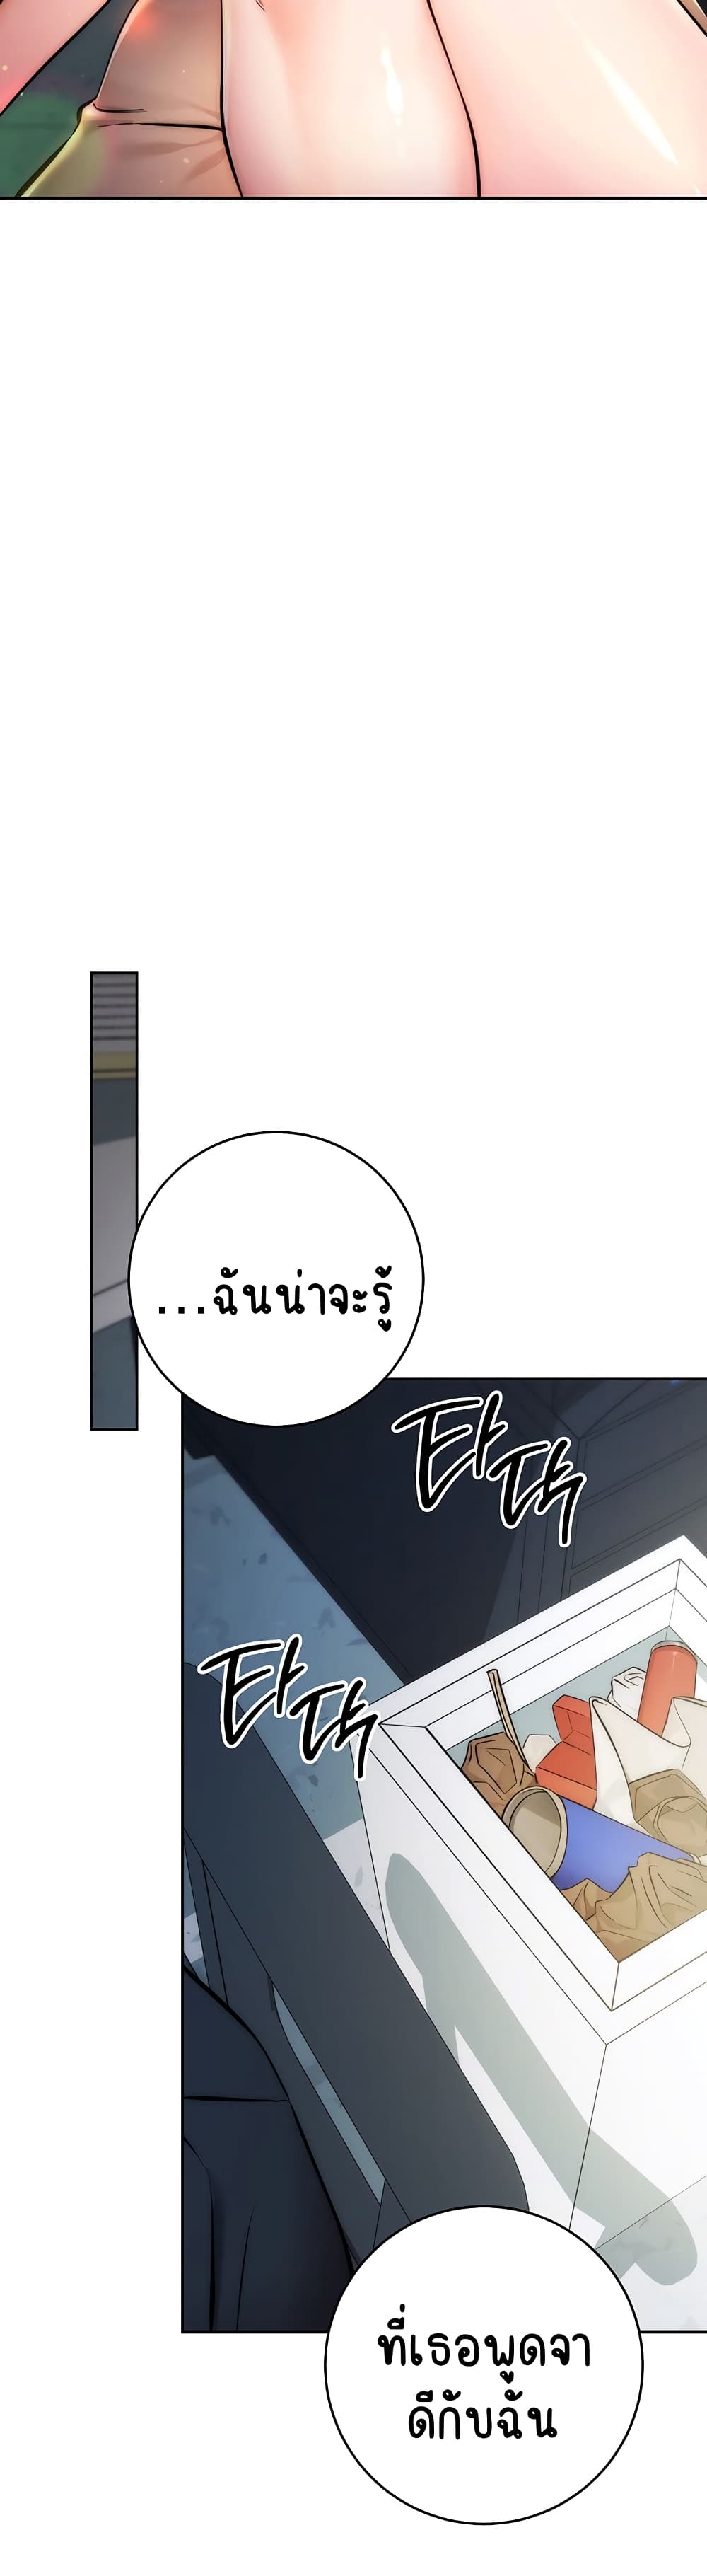 Outsider: The Invisible Man ตอนที่ 1 ภาพ 36